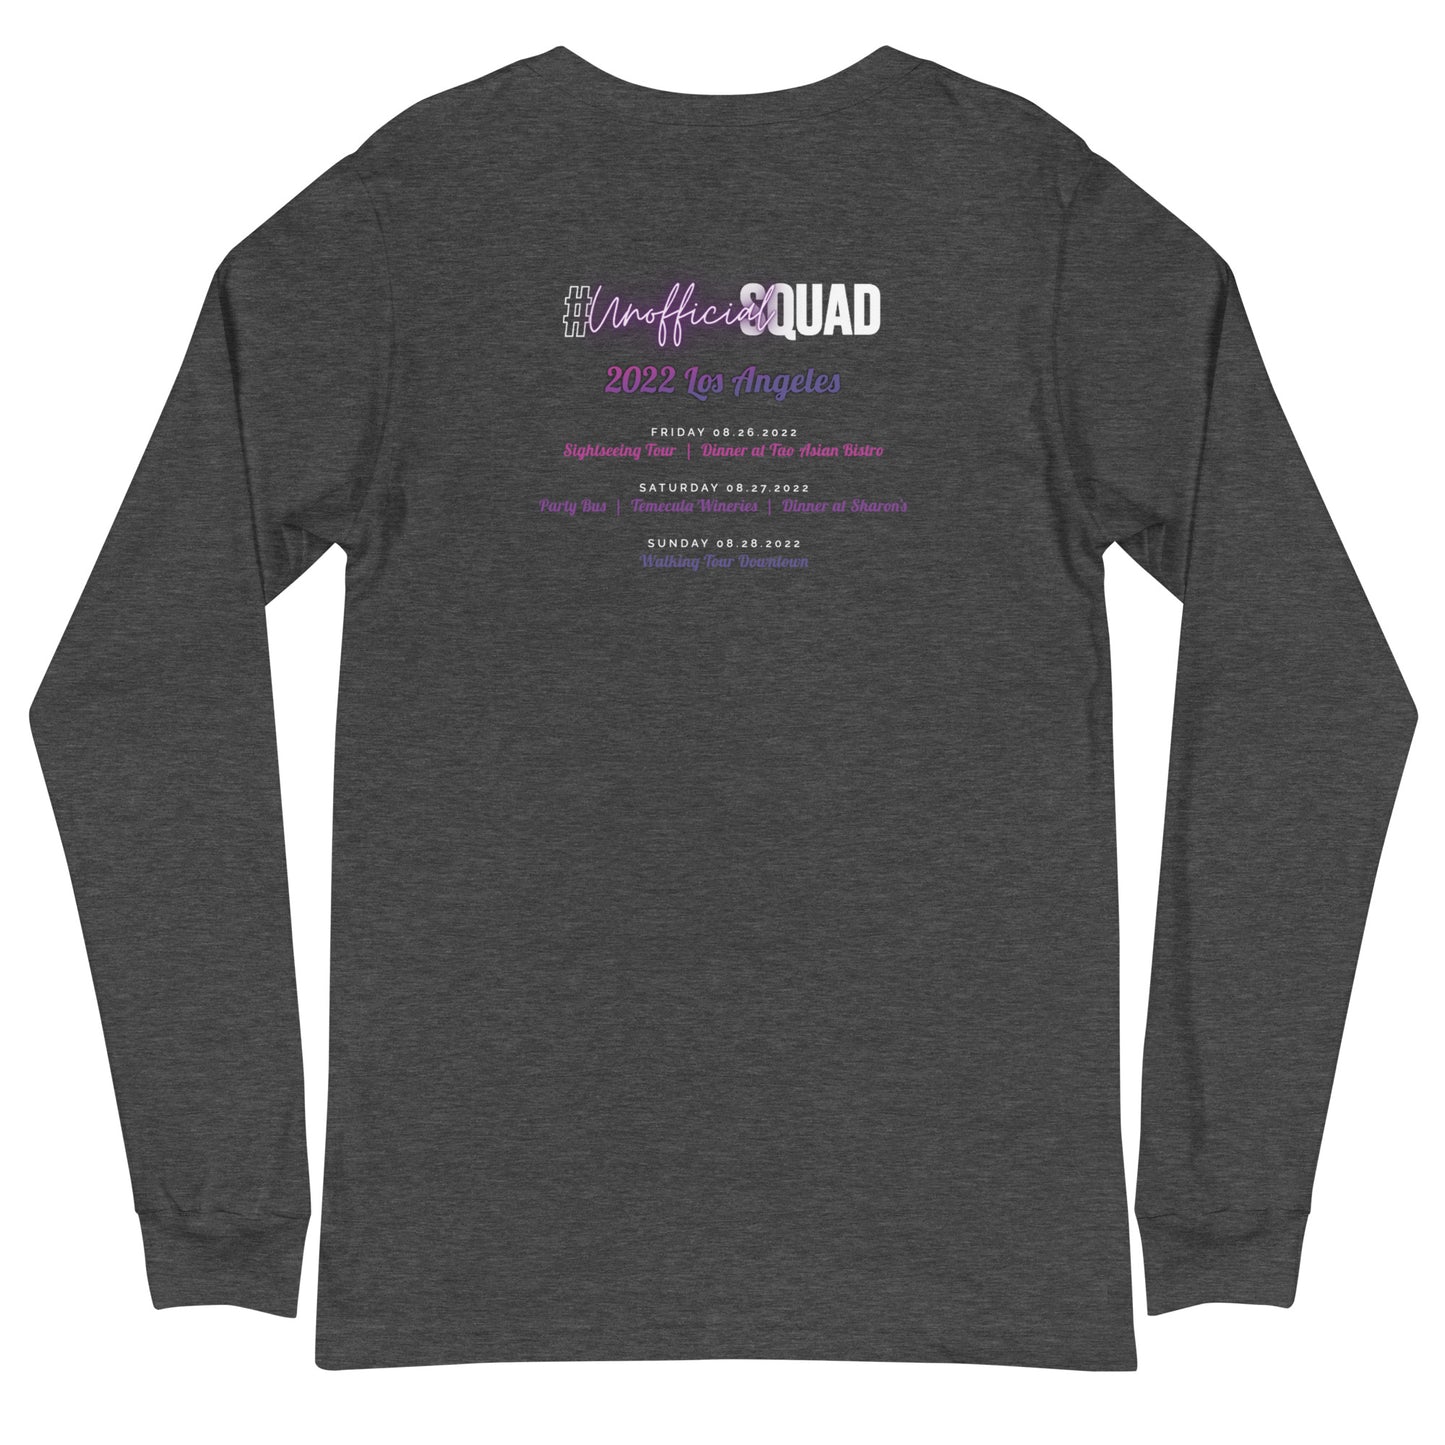 Unofficial Squad Summer Camp 2022 - Unisex Long Sleeve Tee